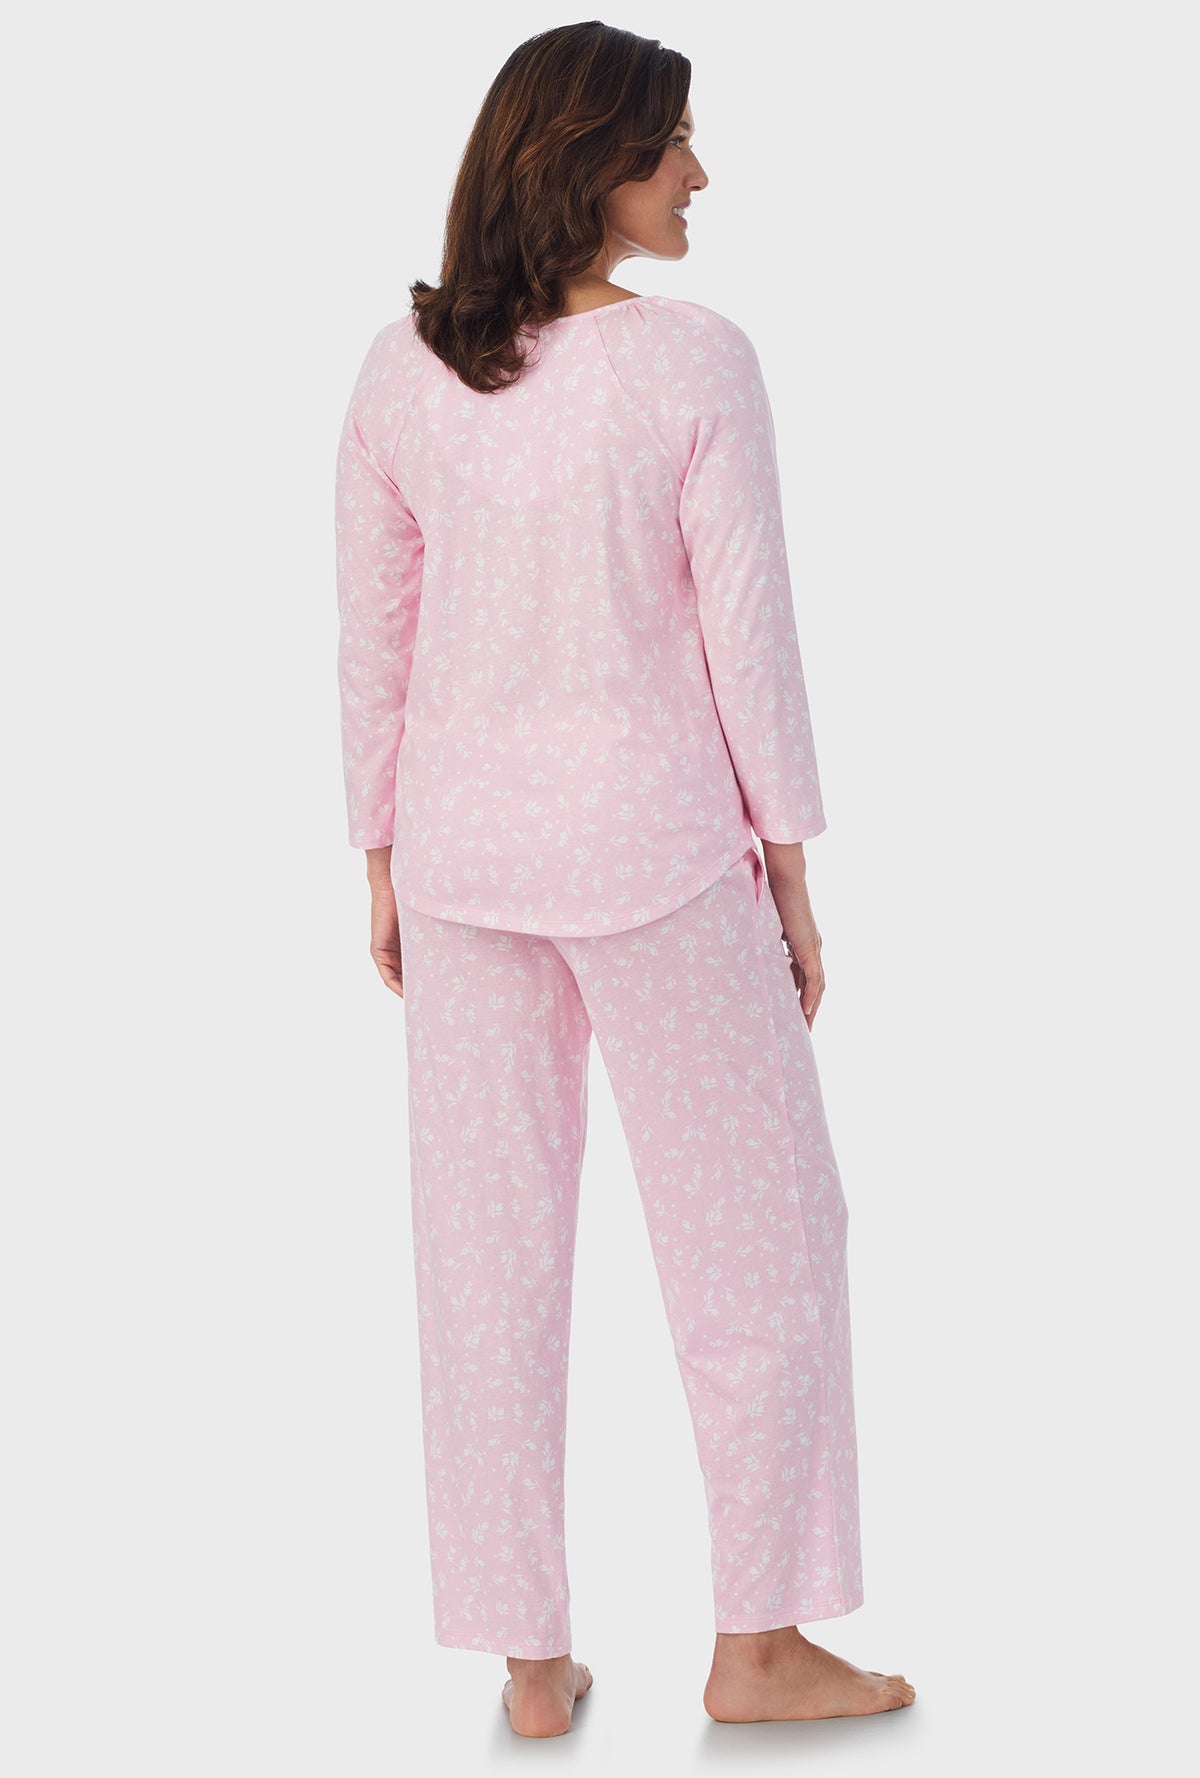 A lady wearing pink 3/4 Sleeve Long Pant PJ Set with White Rosebuds  print